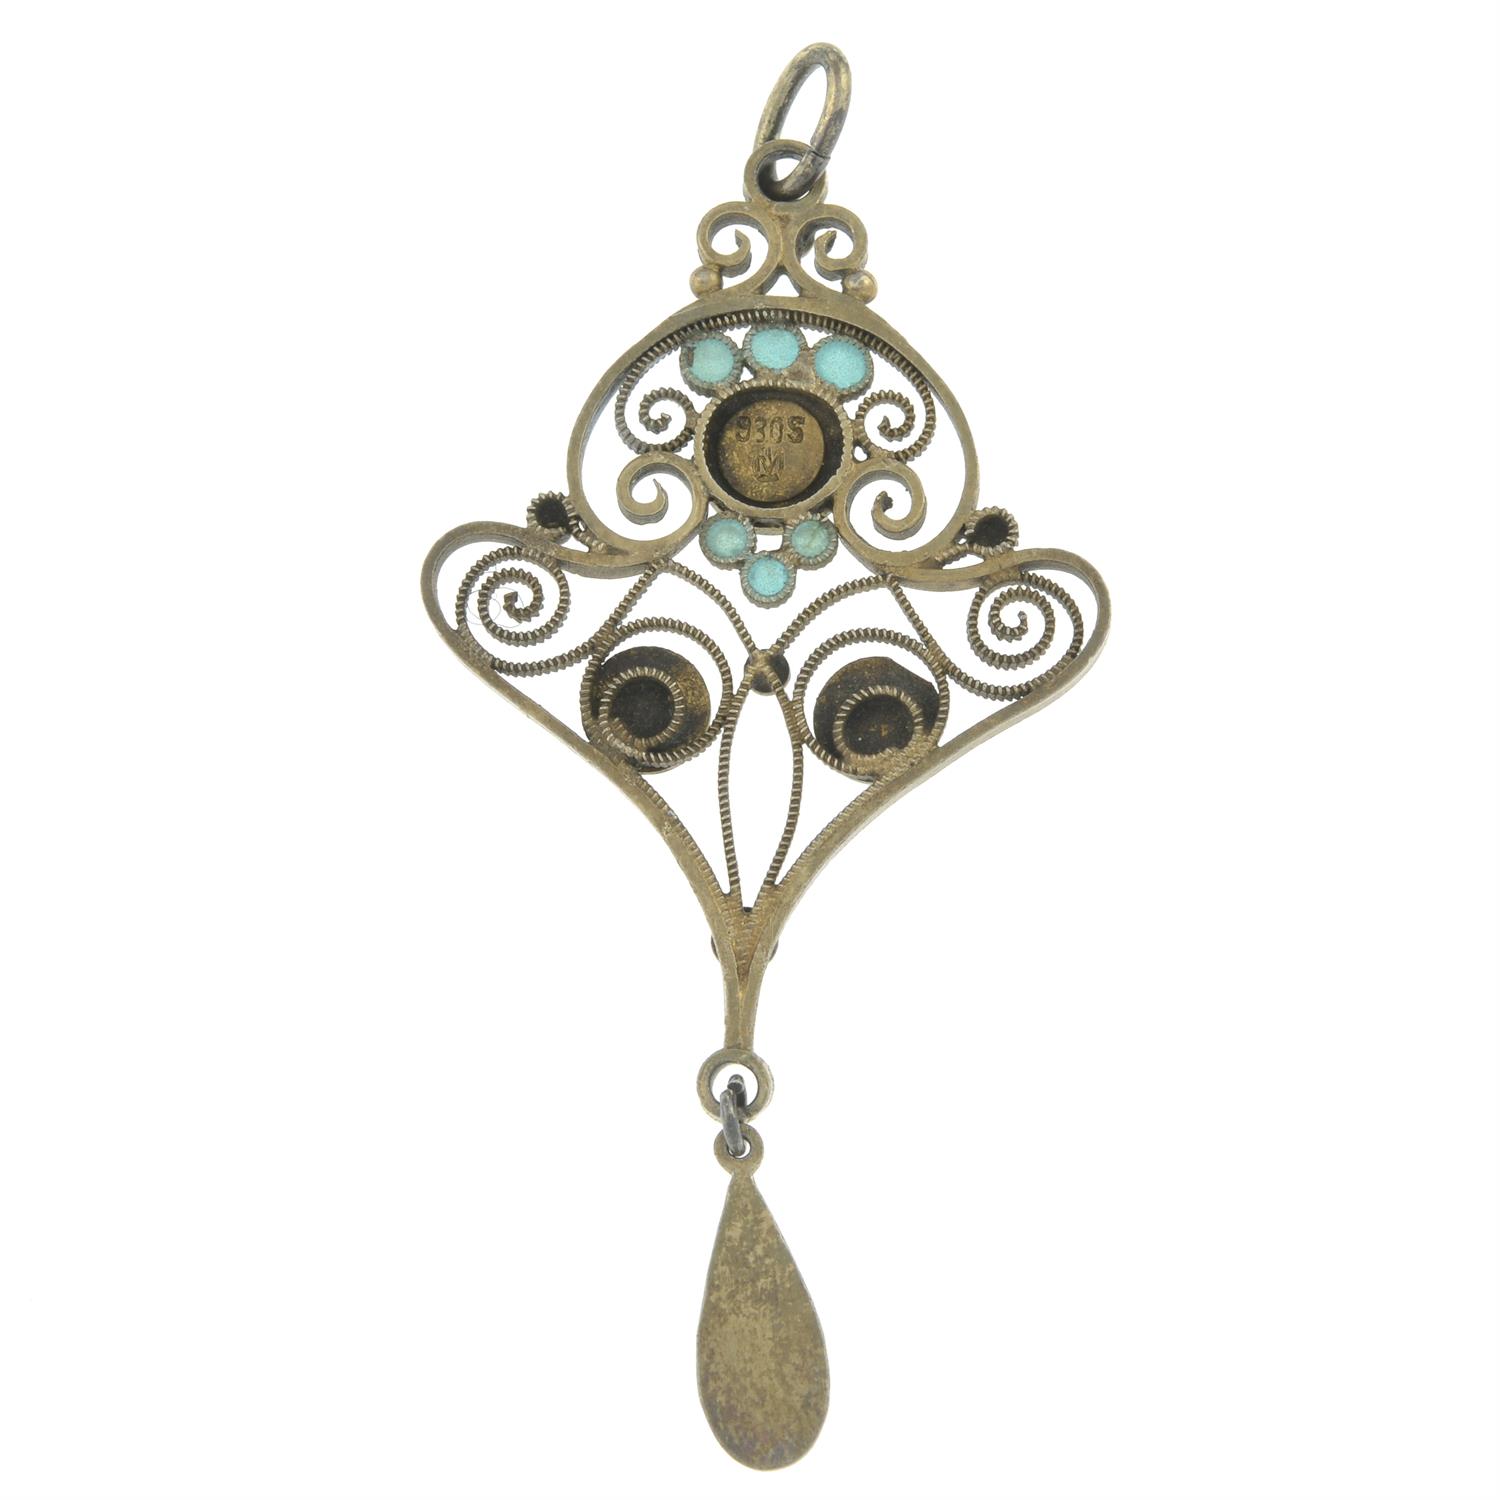 Early 20th century silver pendant, Marius Hammer - Image 2 of 2